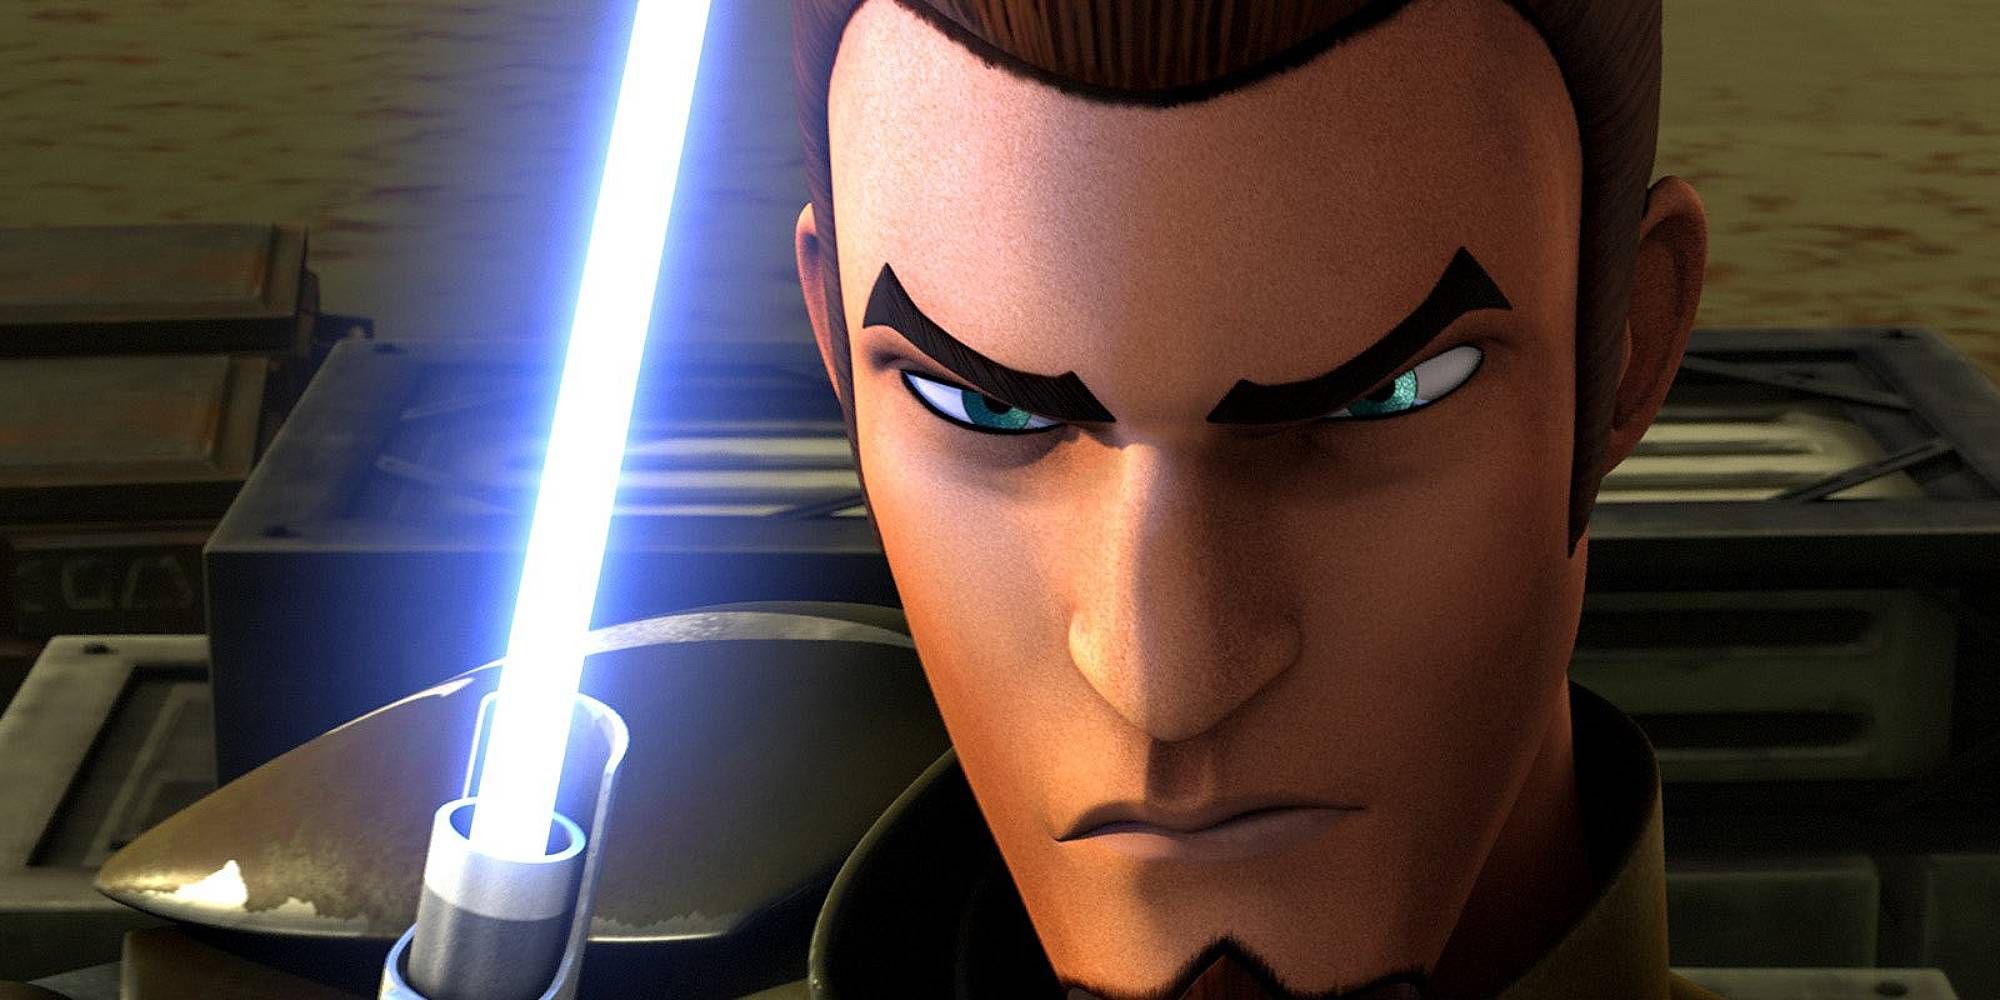 A tanned male figure holds up a lightsaber and glares